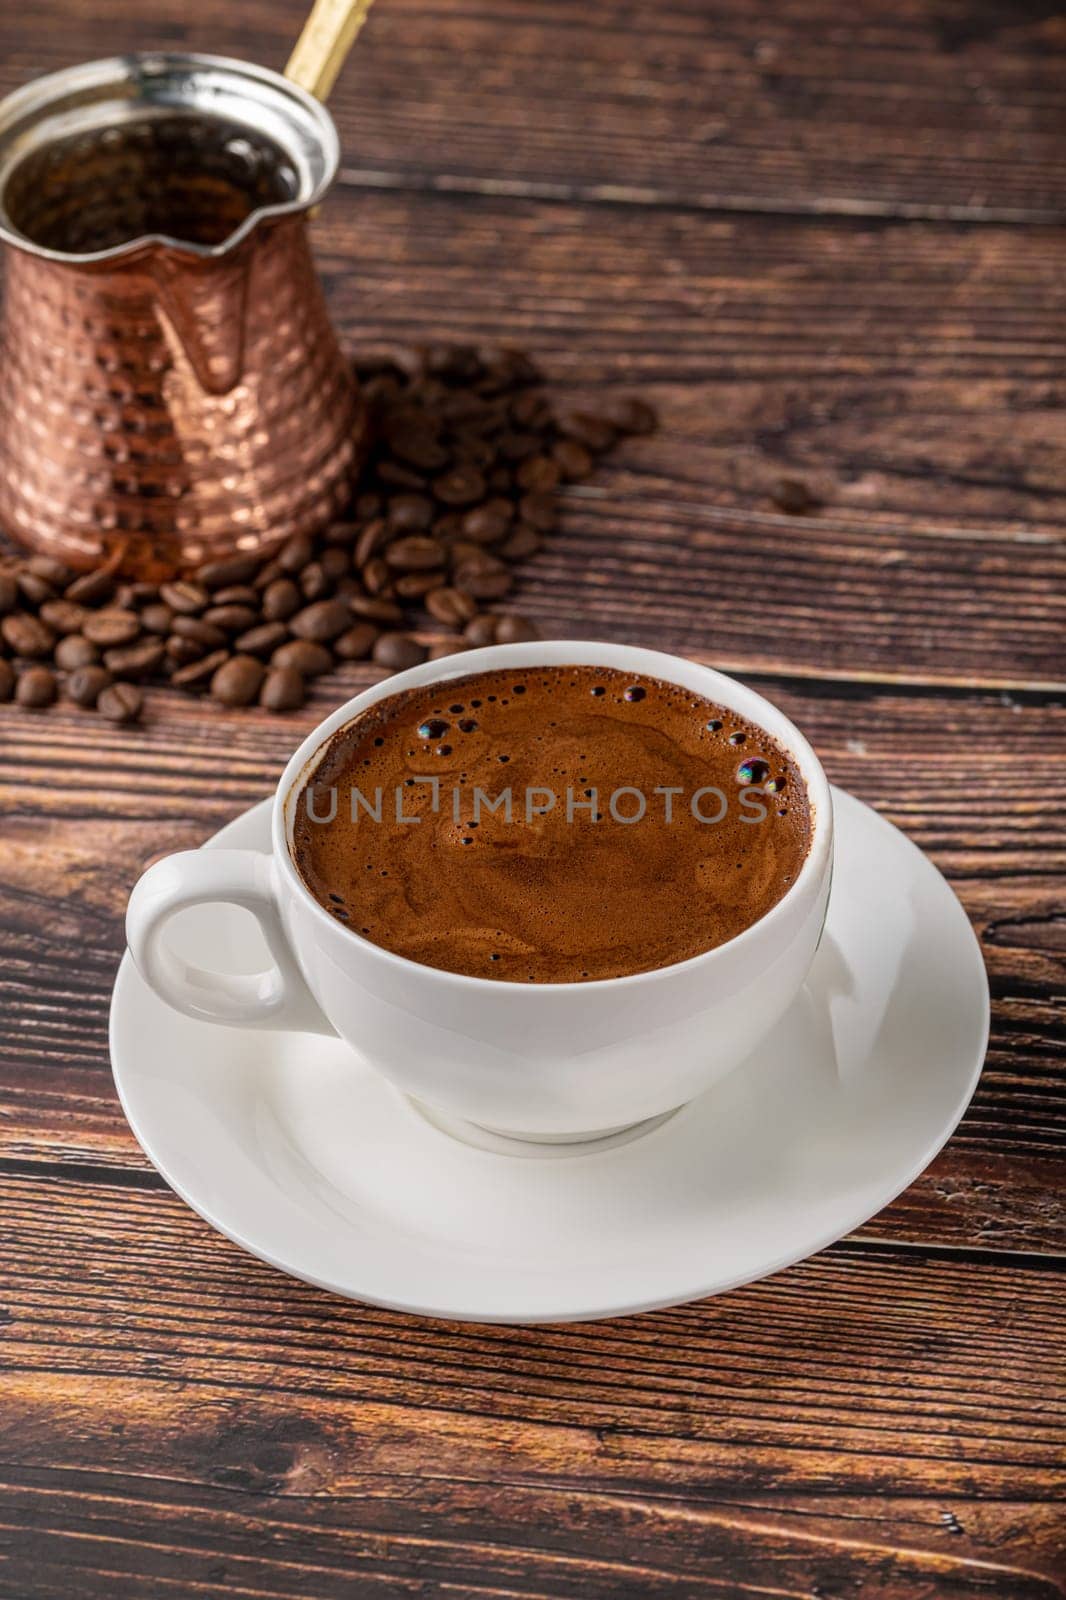 Double Turkish coffee in a white porcelain cup with a decorative coffee pot on a wooden table by Sonat